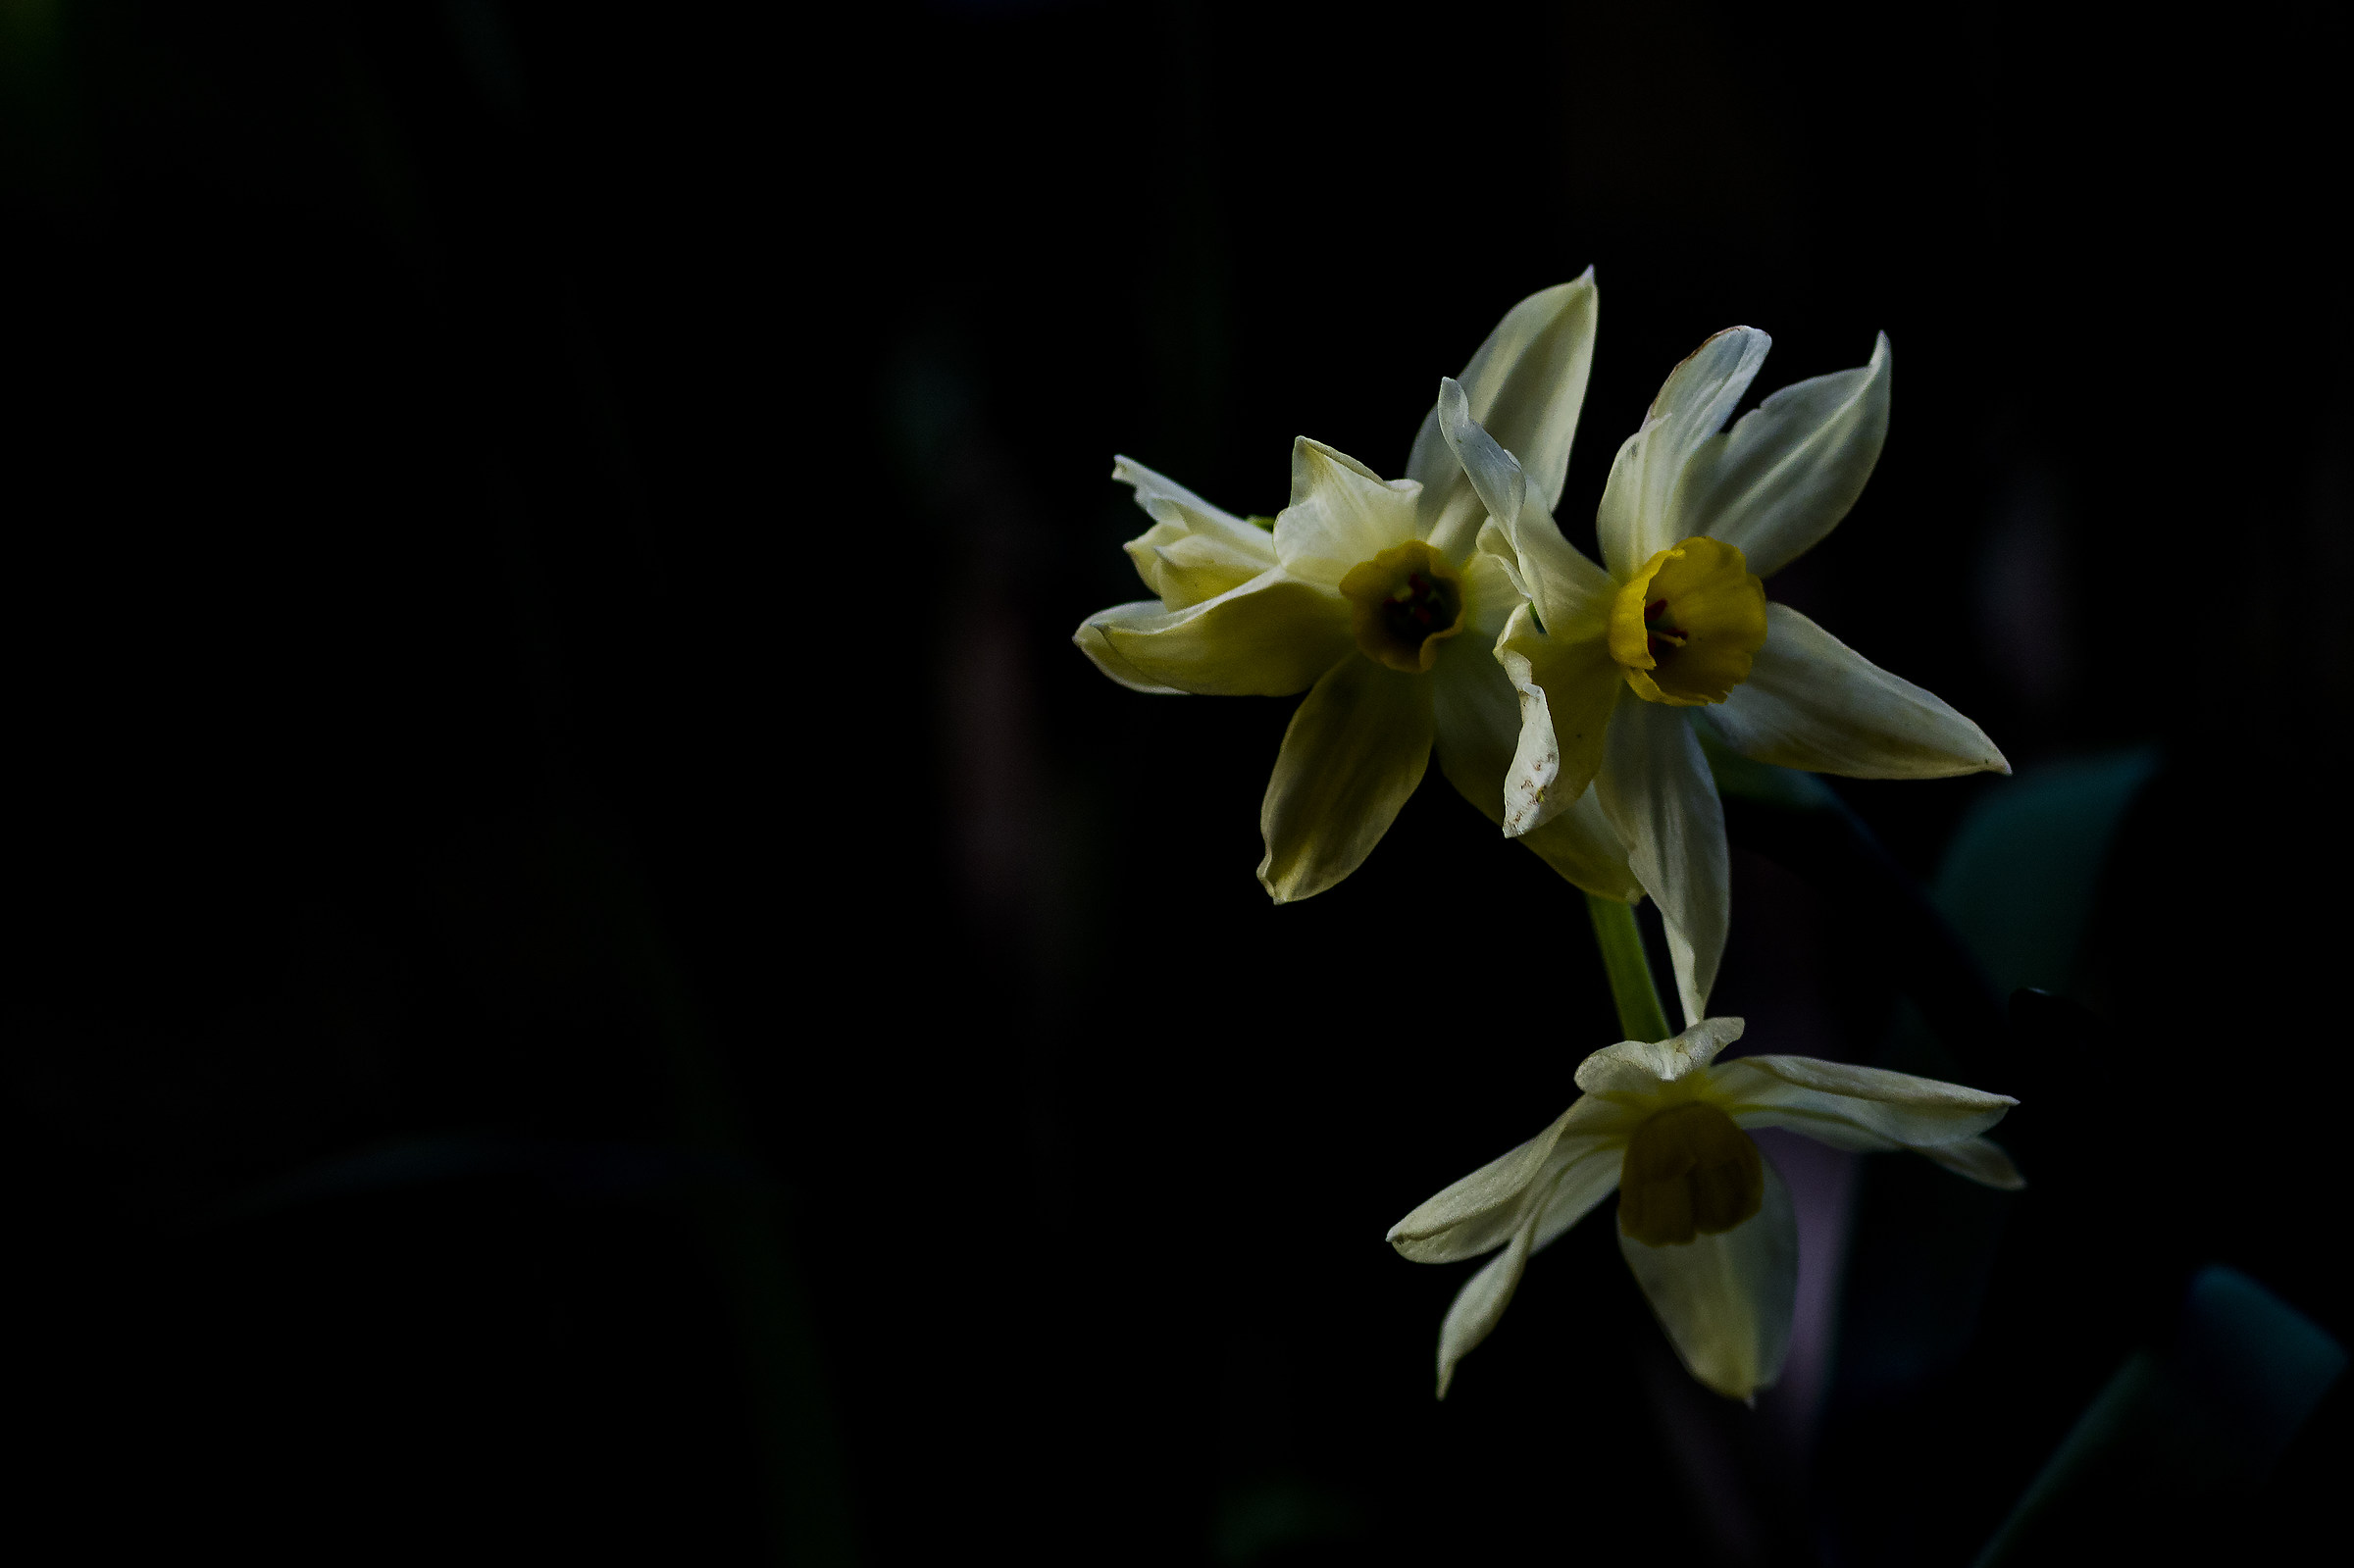 The first narcissus...